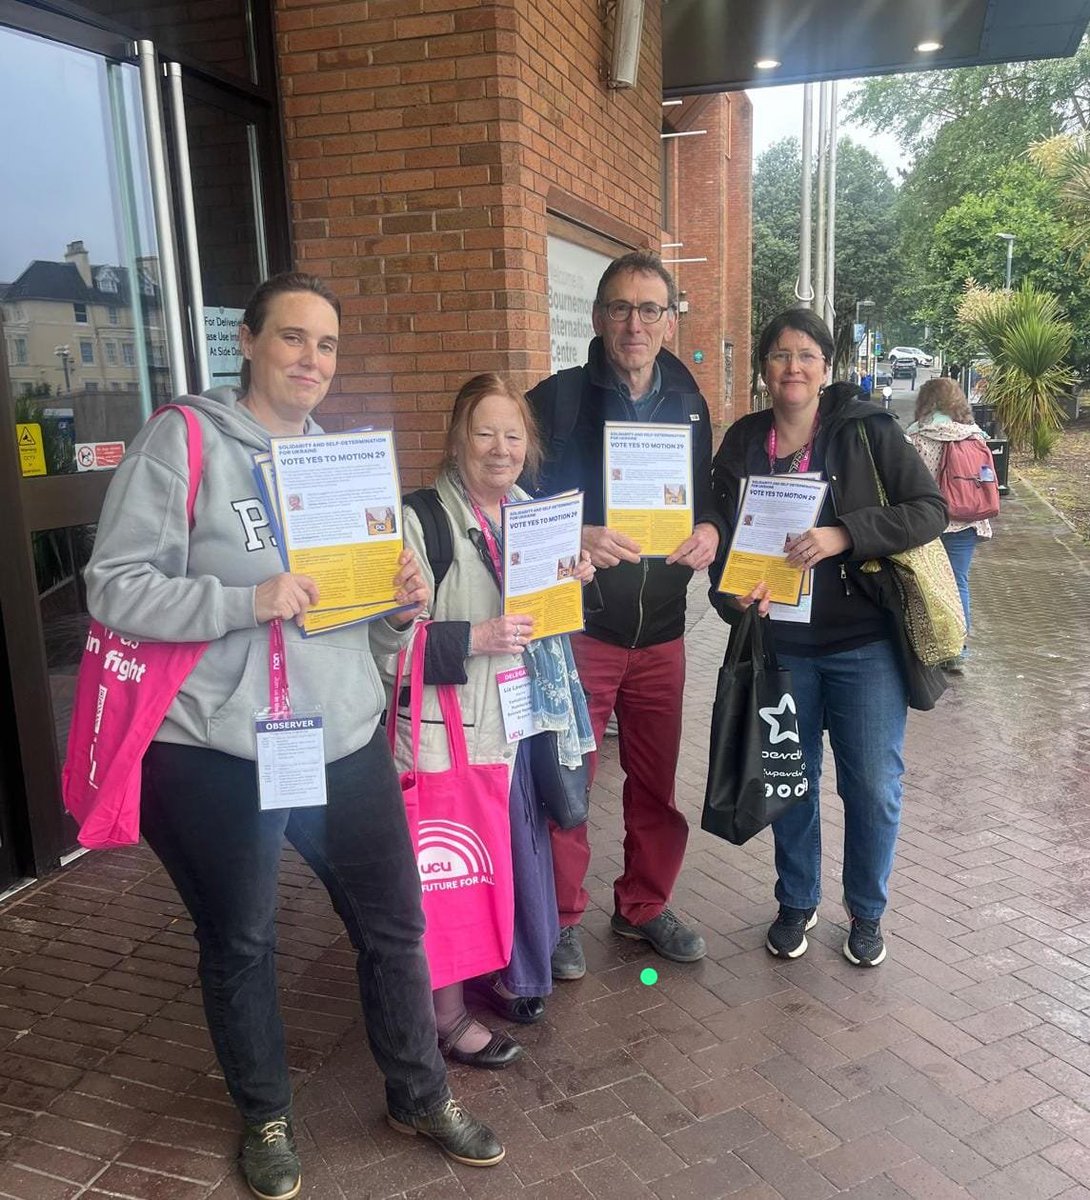 Leafleting at UCU Congress - starts tomorrow, but people are arriving today. For our leaflet and what's coming up at the Congress, see below. If you'd like to contact UCU Members for Ukraine at the Congress, email admin@ucumembersforukraine.co.uk #UCU2024 #AFairerFutureForAll